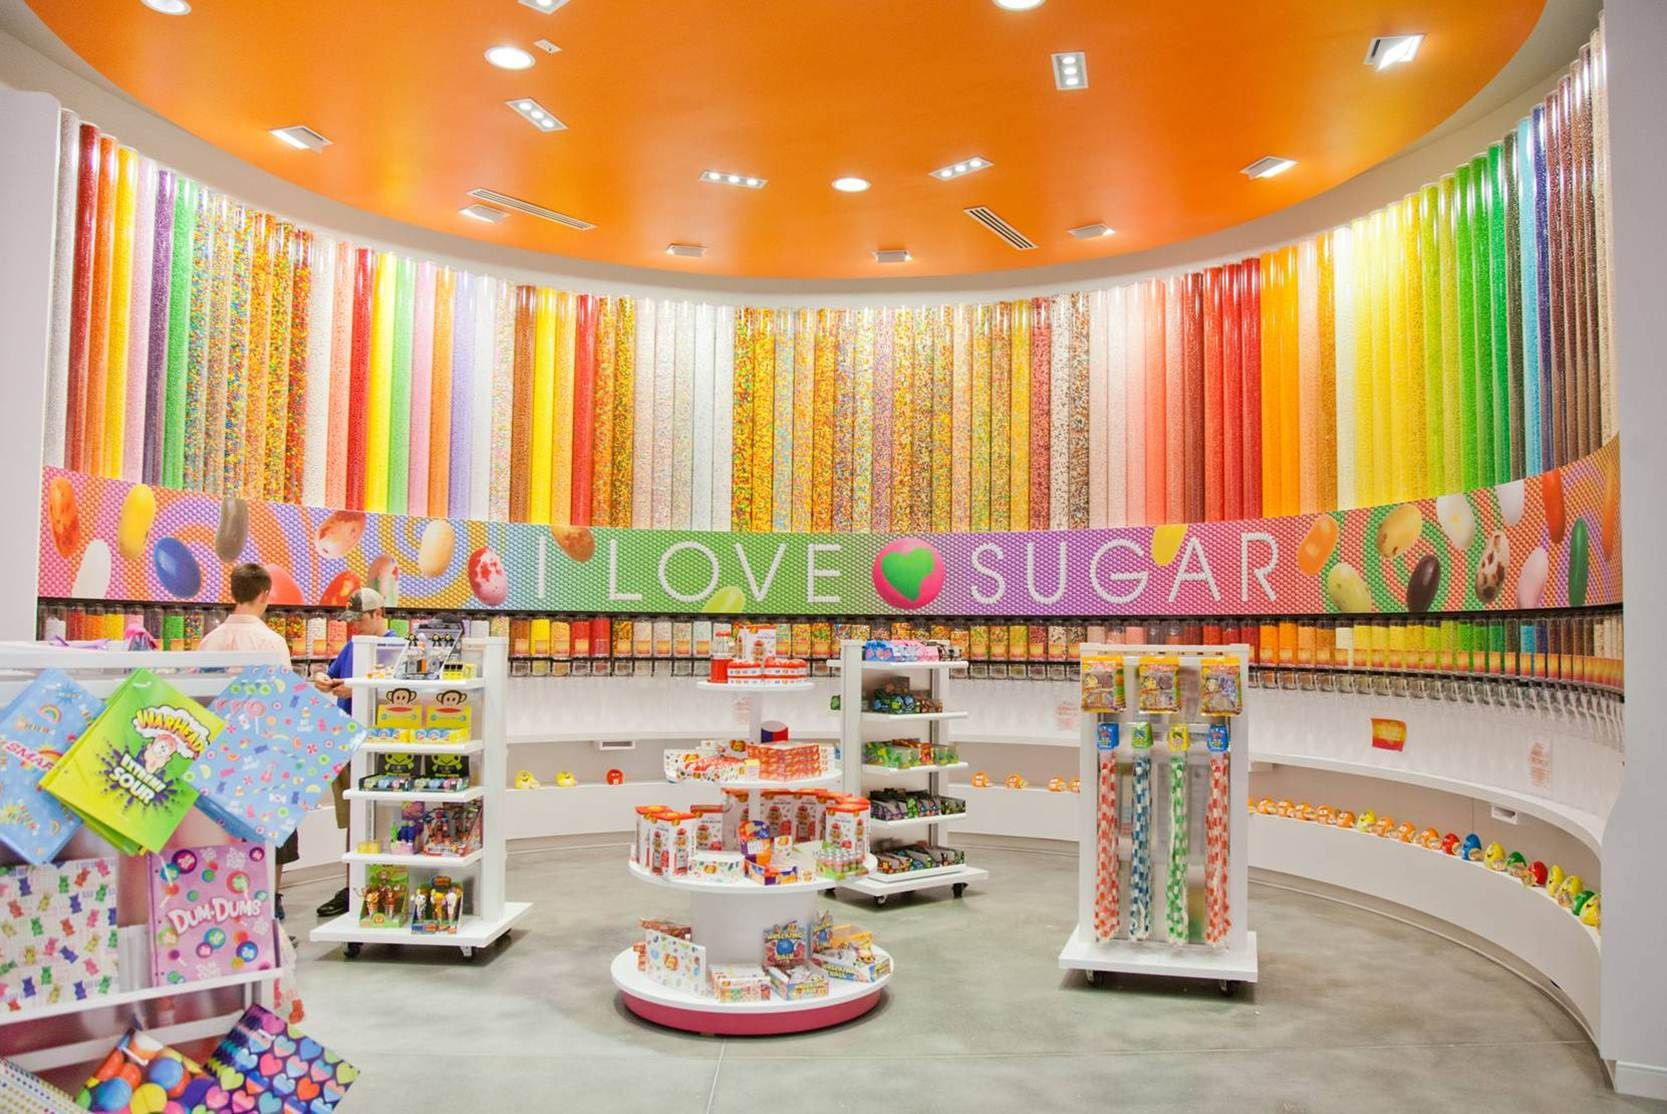 Birthday Party Ideas In Myrtle Beach Sc
 I LOVE SUGAR candy store just opened up in Myrtle Beach